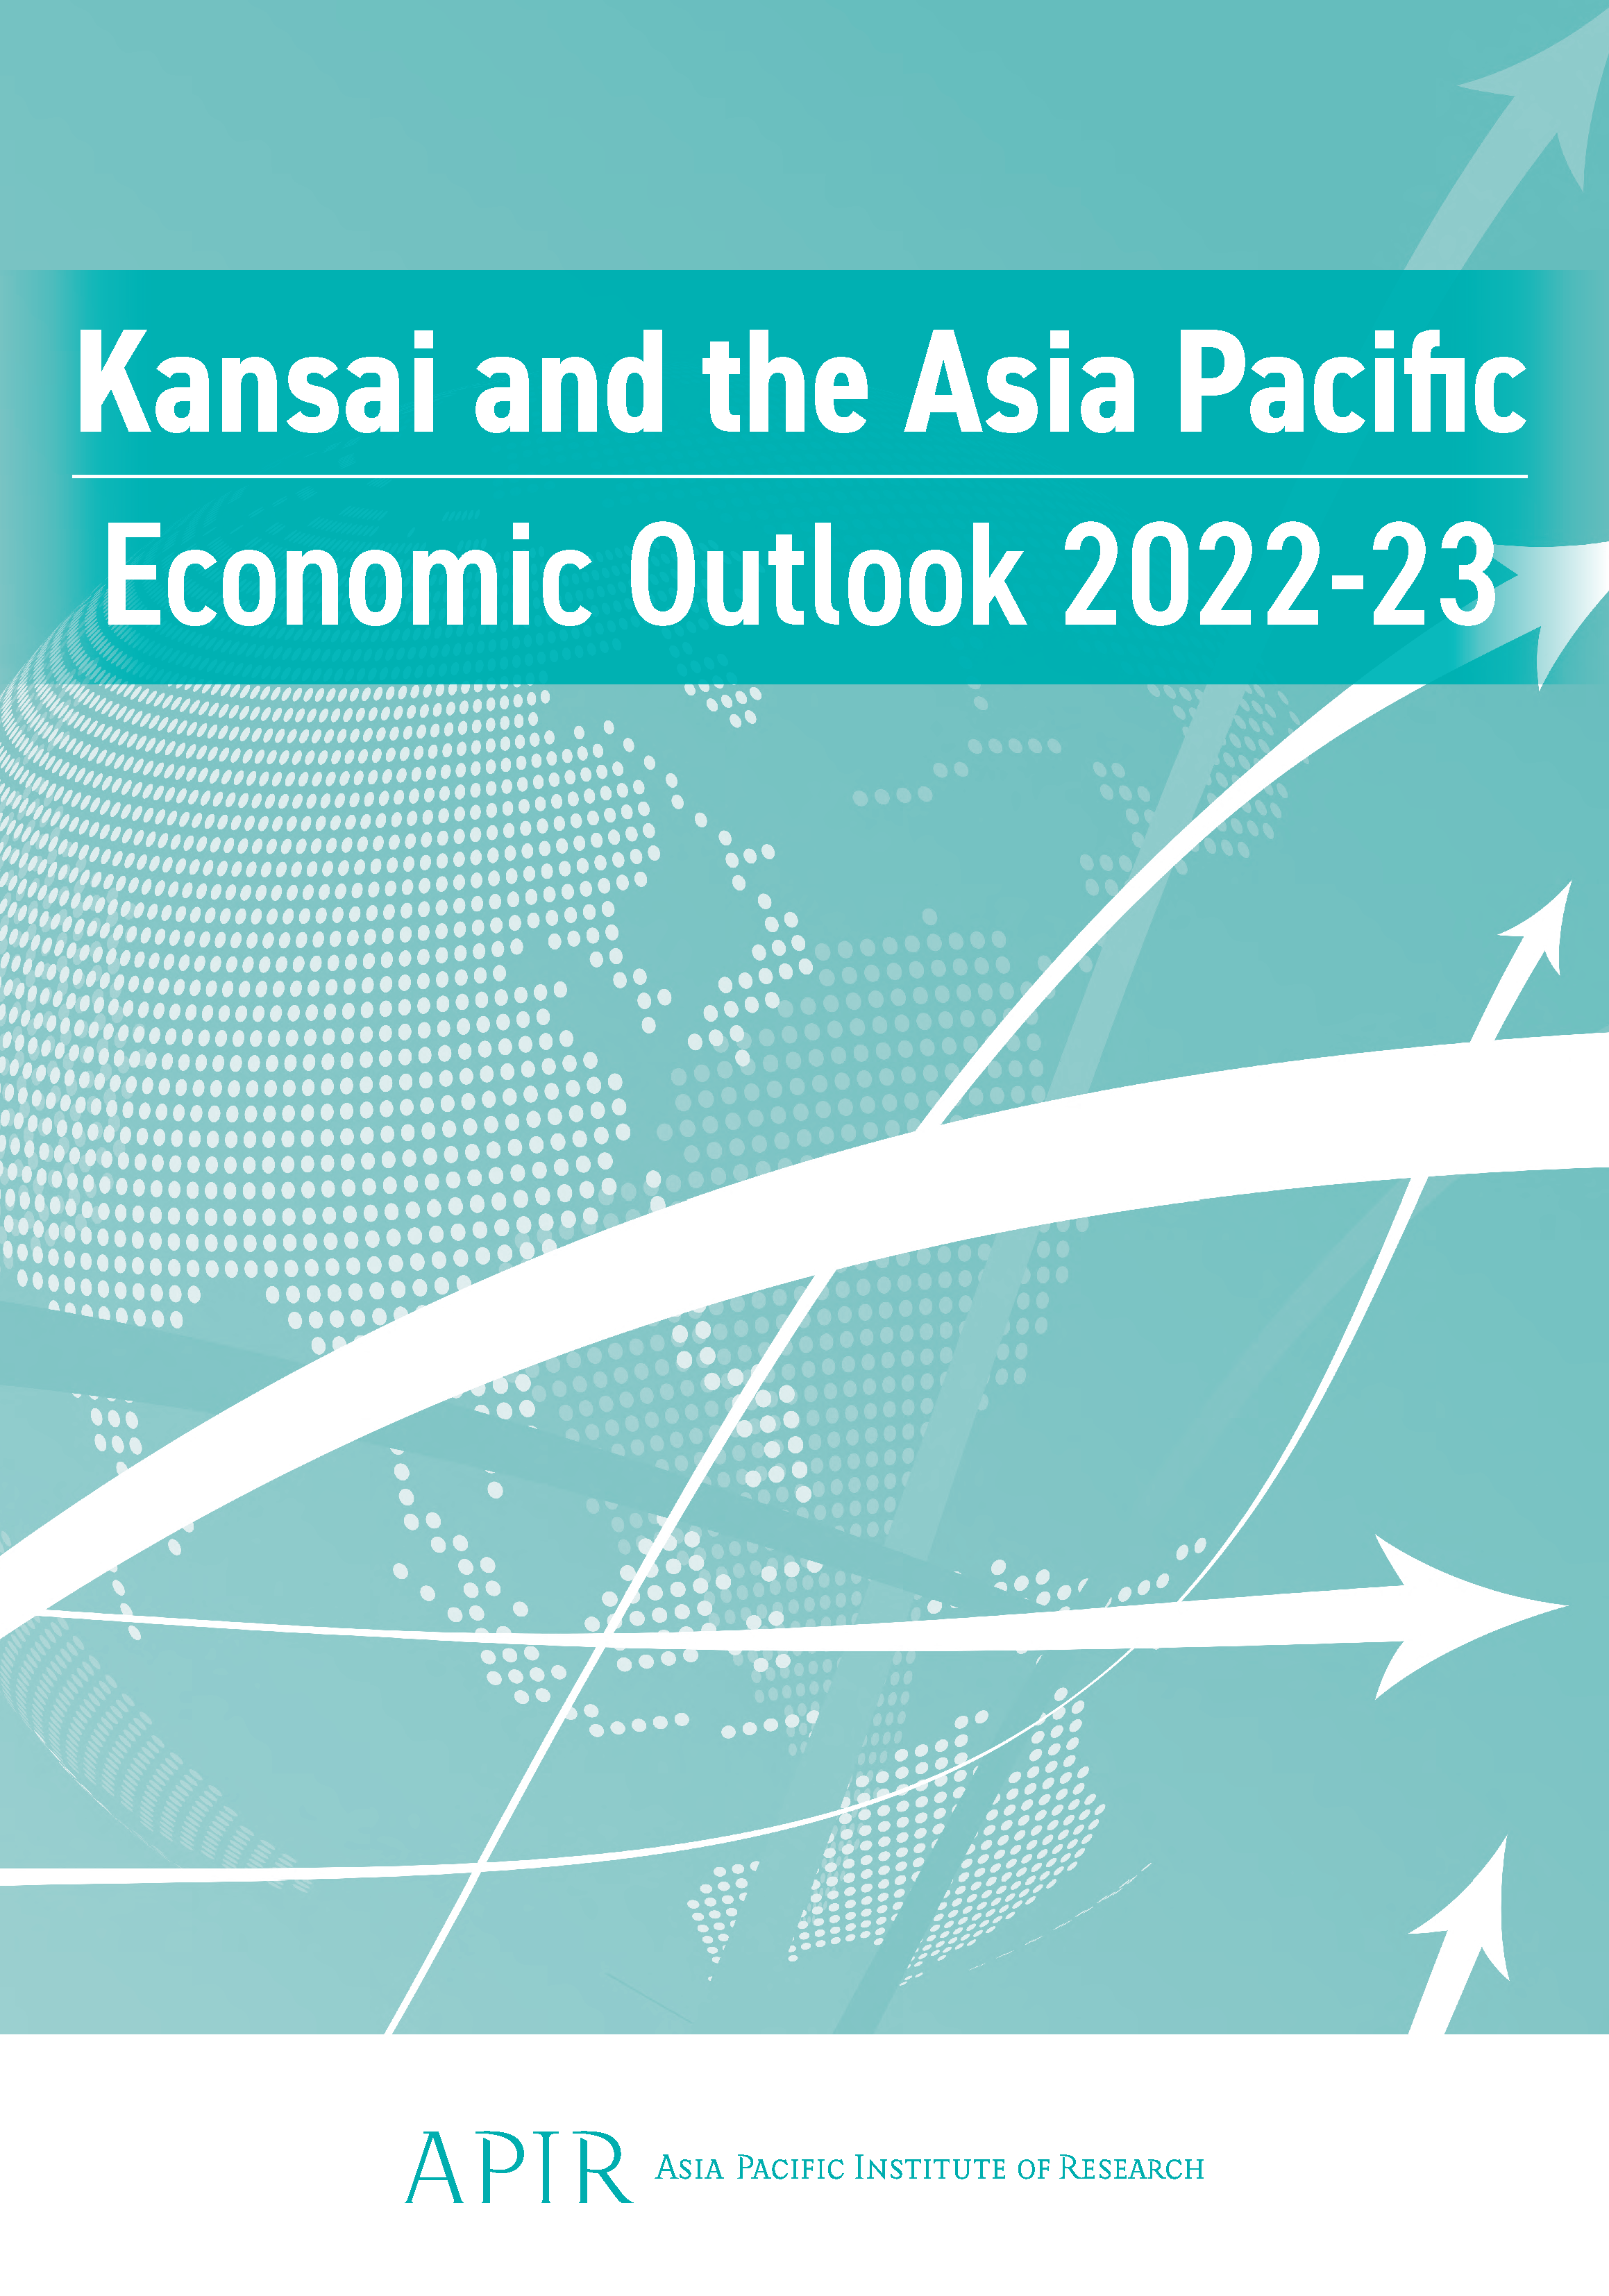 Kansai and the Asia Pacific Economic Outlook: 2022-23